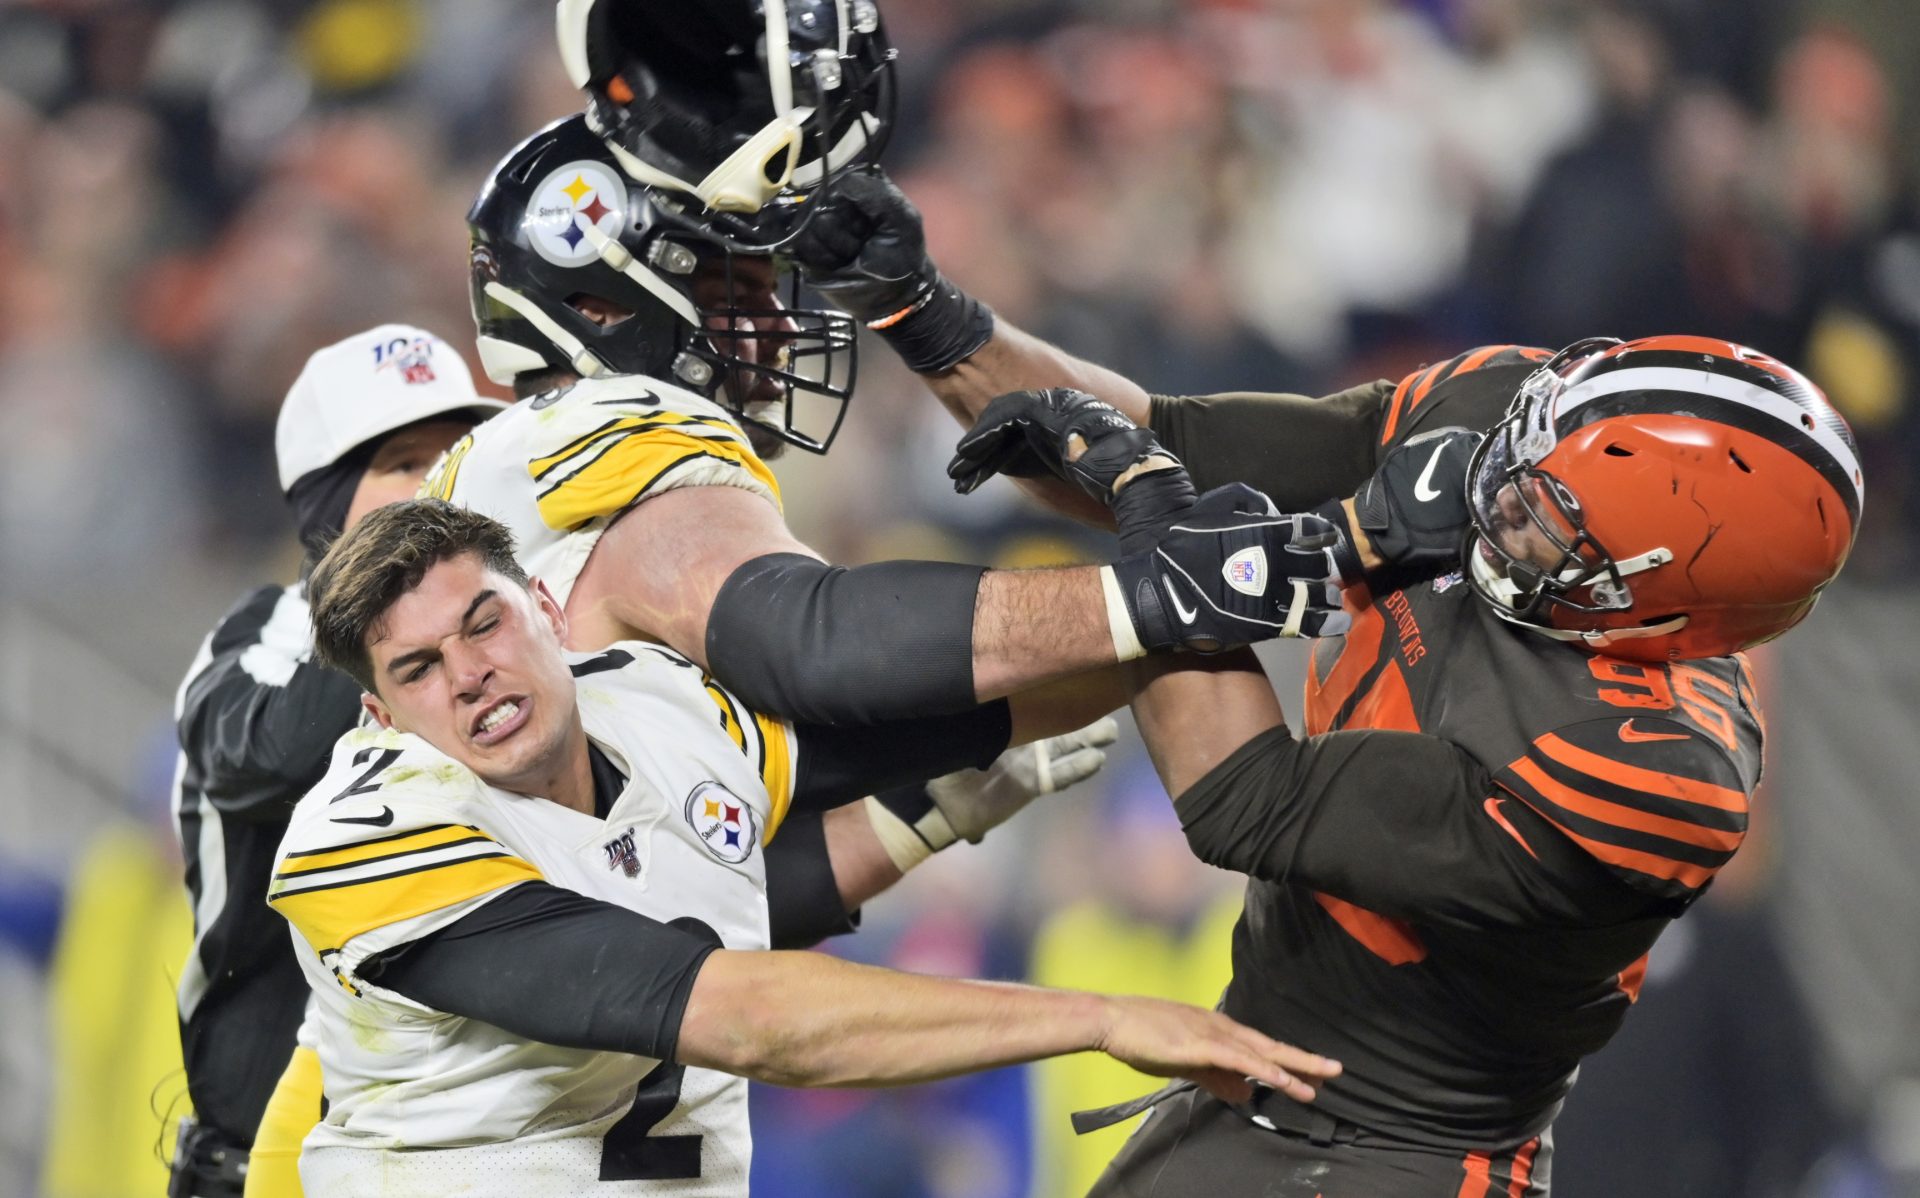 Cleveland Browns defensive end Myles Garrett (95) hits Pittsburgh Steelers quarterback Mason Rudolph (2) with a helmet during the second half of an NFL football game Thursday, Nov. 14, 2019, in Cleveland.